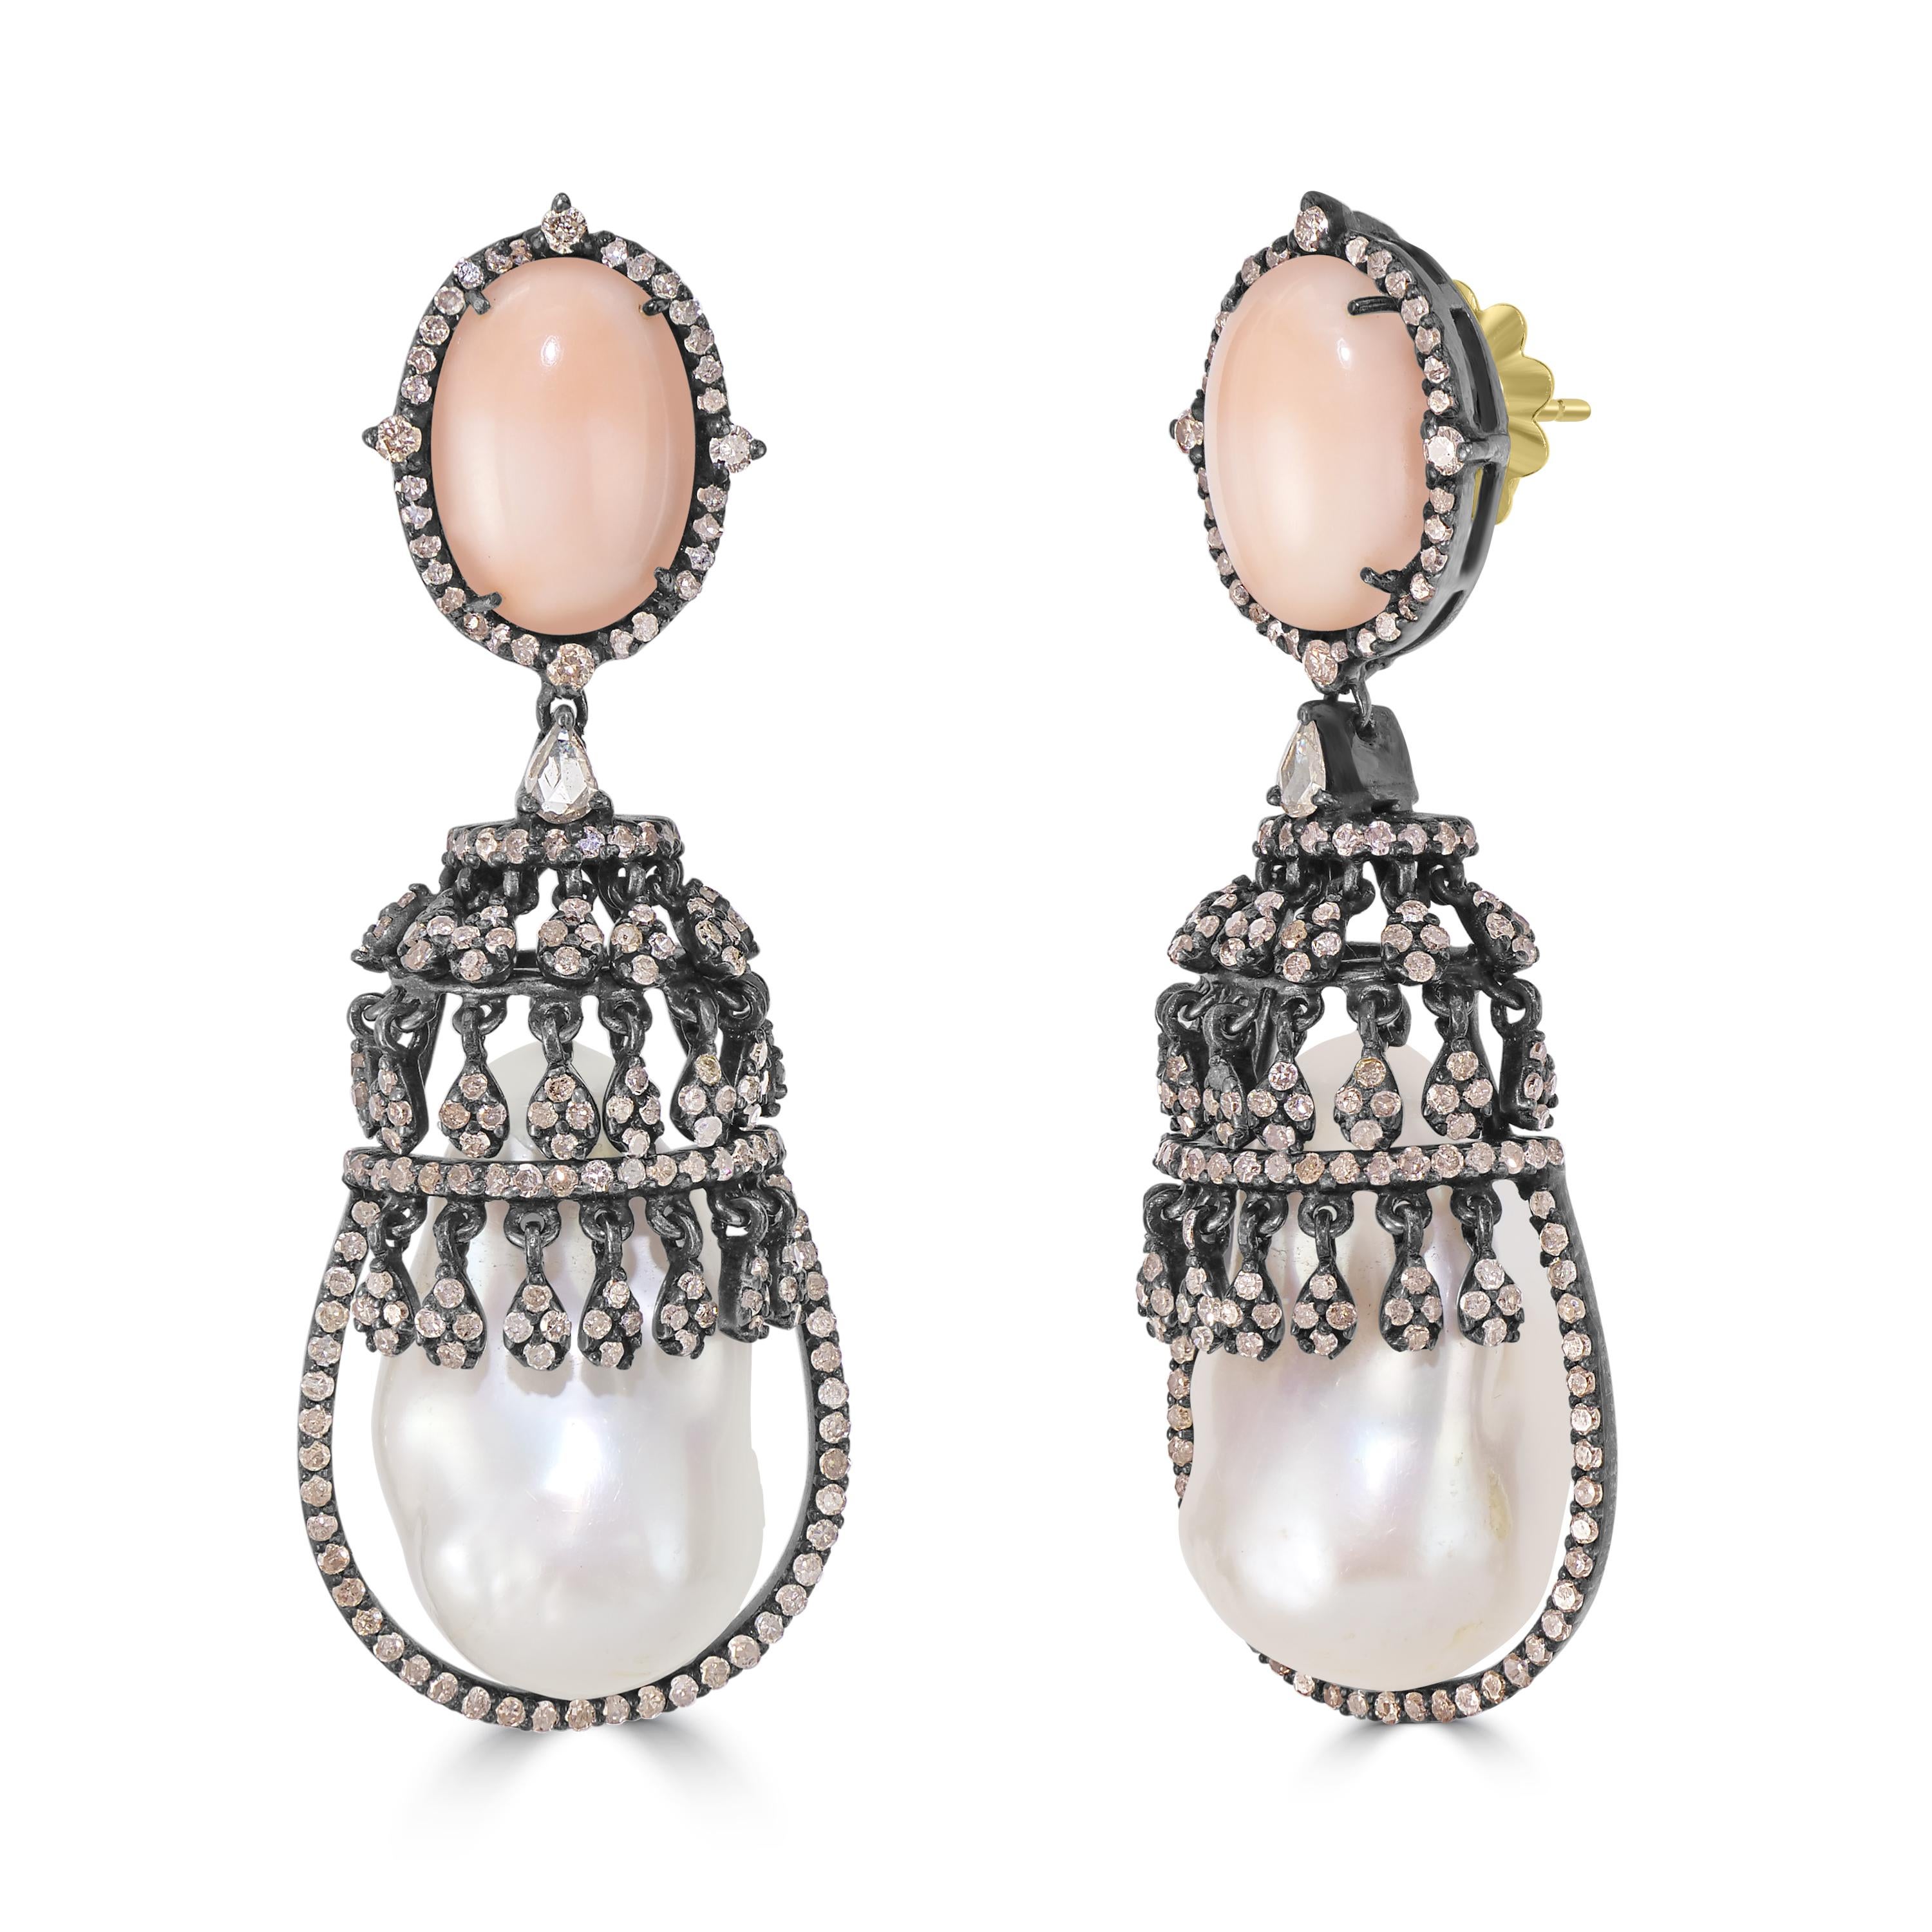 Introducing our Victorian 12 Cttw. Peach Coral, Diamond, and Pearl Drop Earrings – a masterpiece of sophistication and timeless allure.

At the summit of these earrings sits an oval peach coral embraced by a radiant diamond halo, set against a